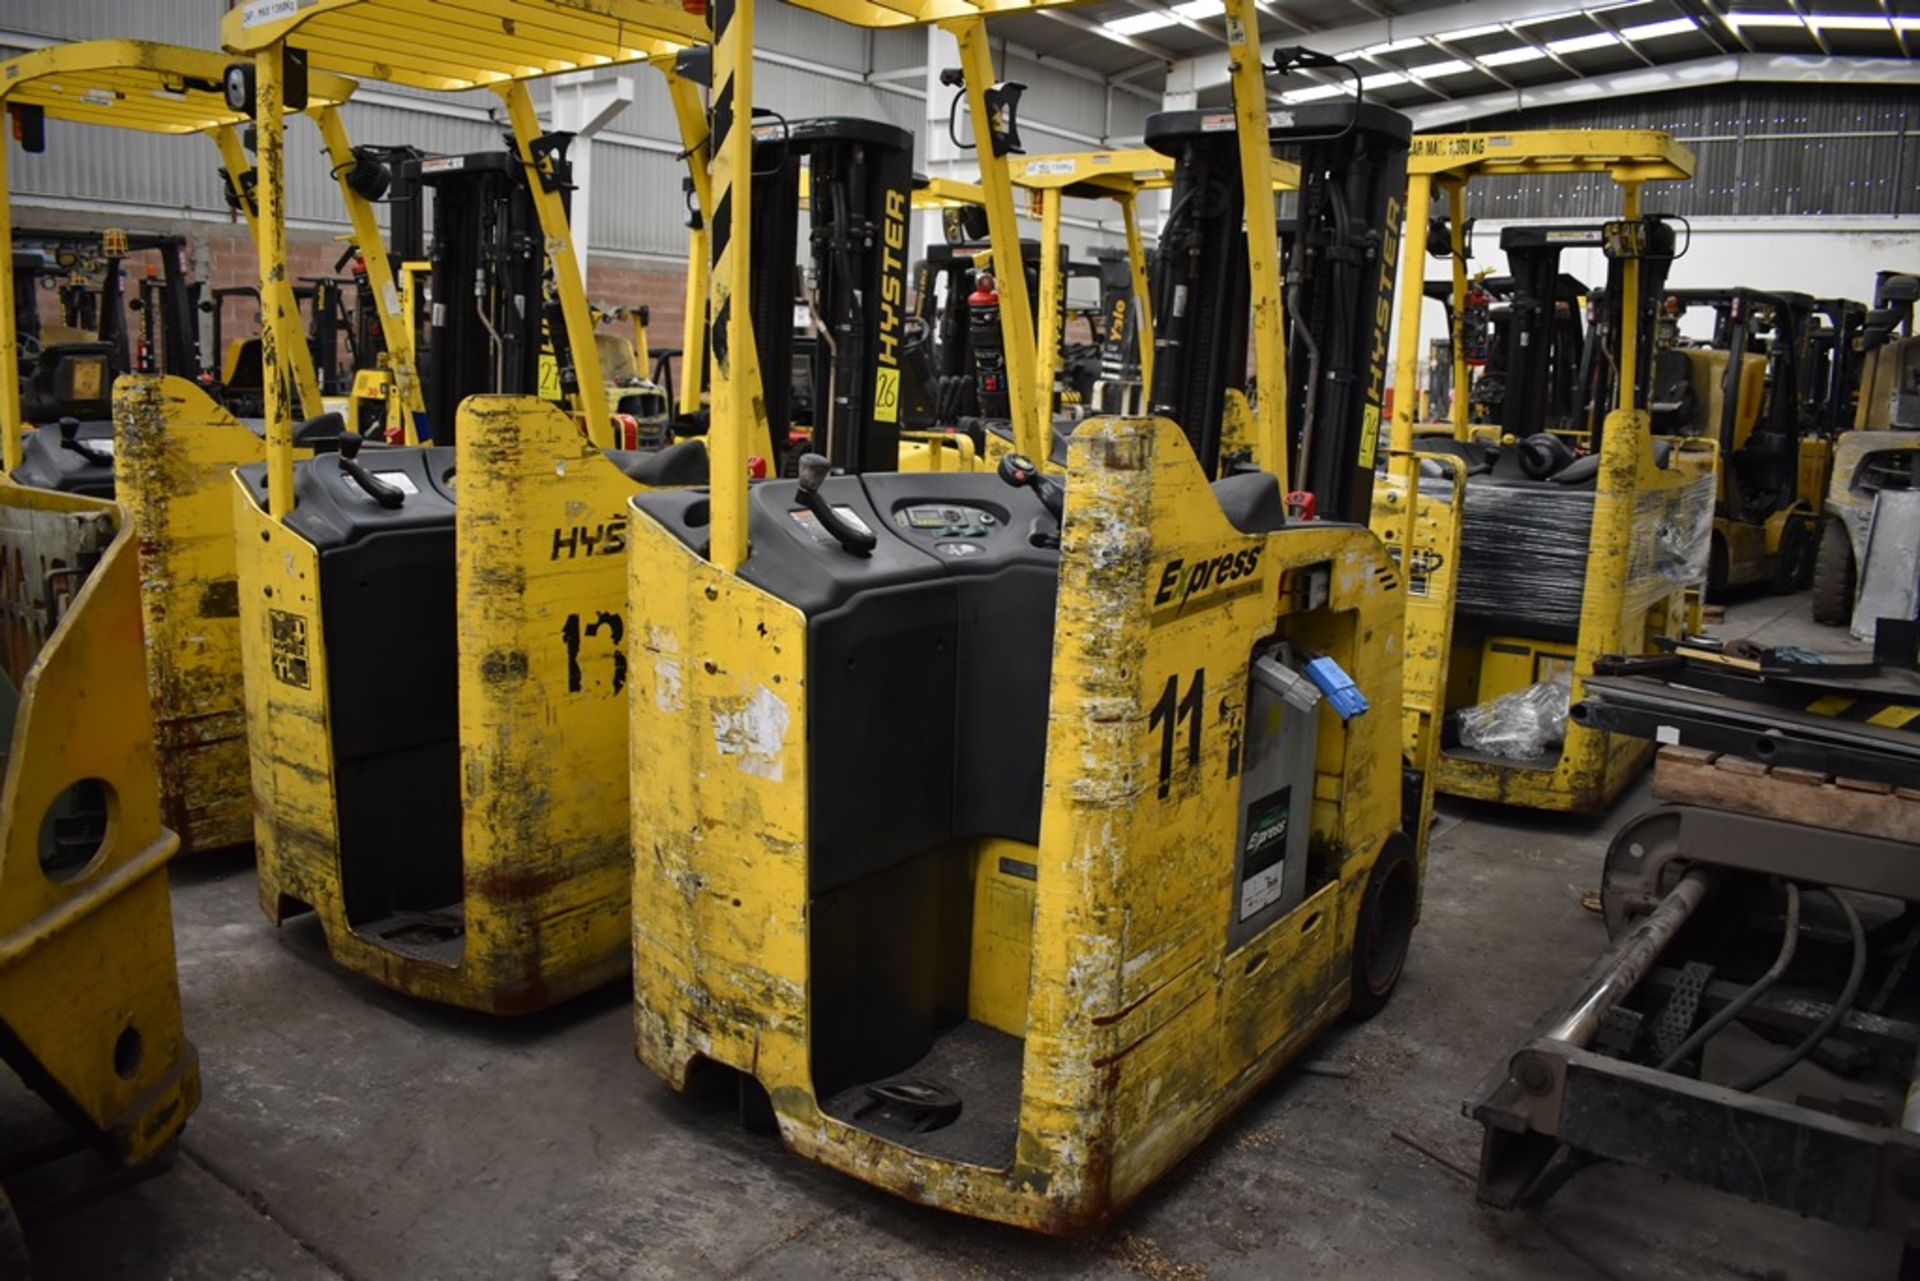 Hyster Electric Forklift, Model E40HSD2-21, S/N B219N02763M, 3850 lb Capacity - Image 12 of 24